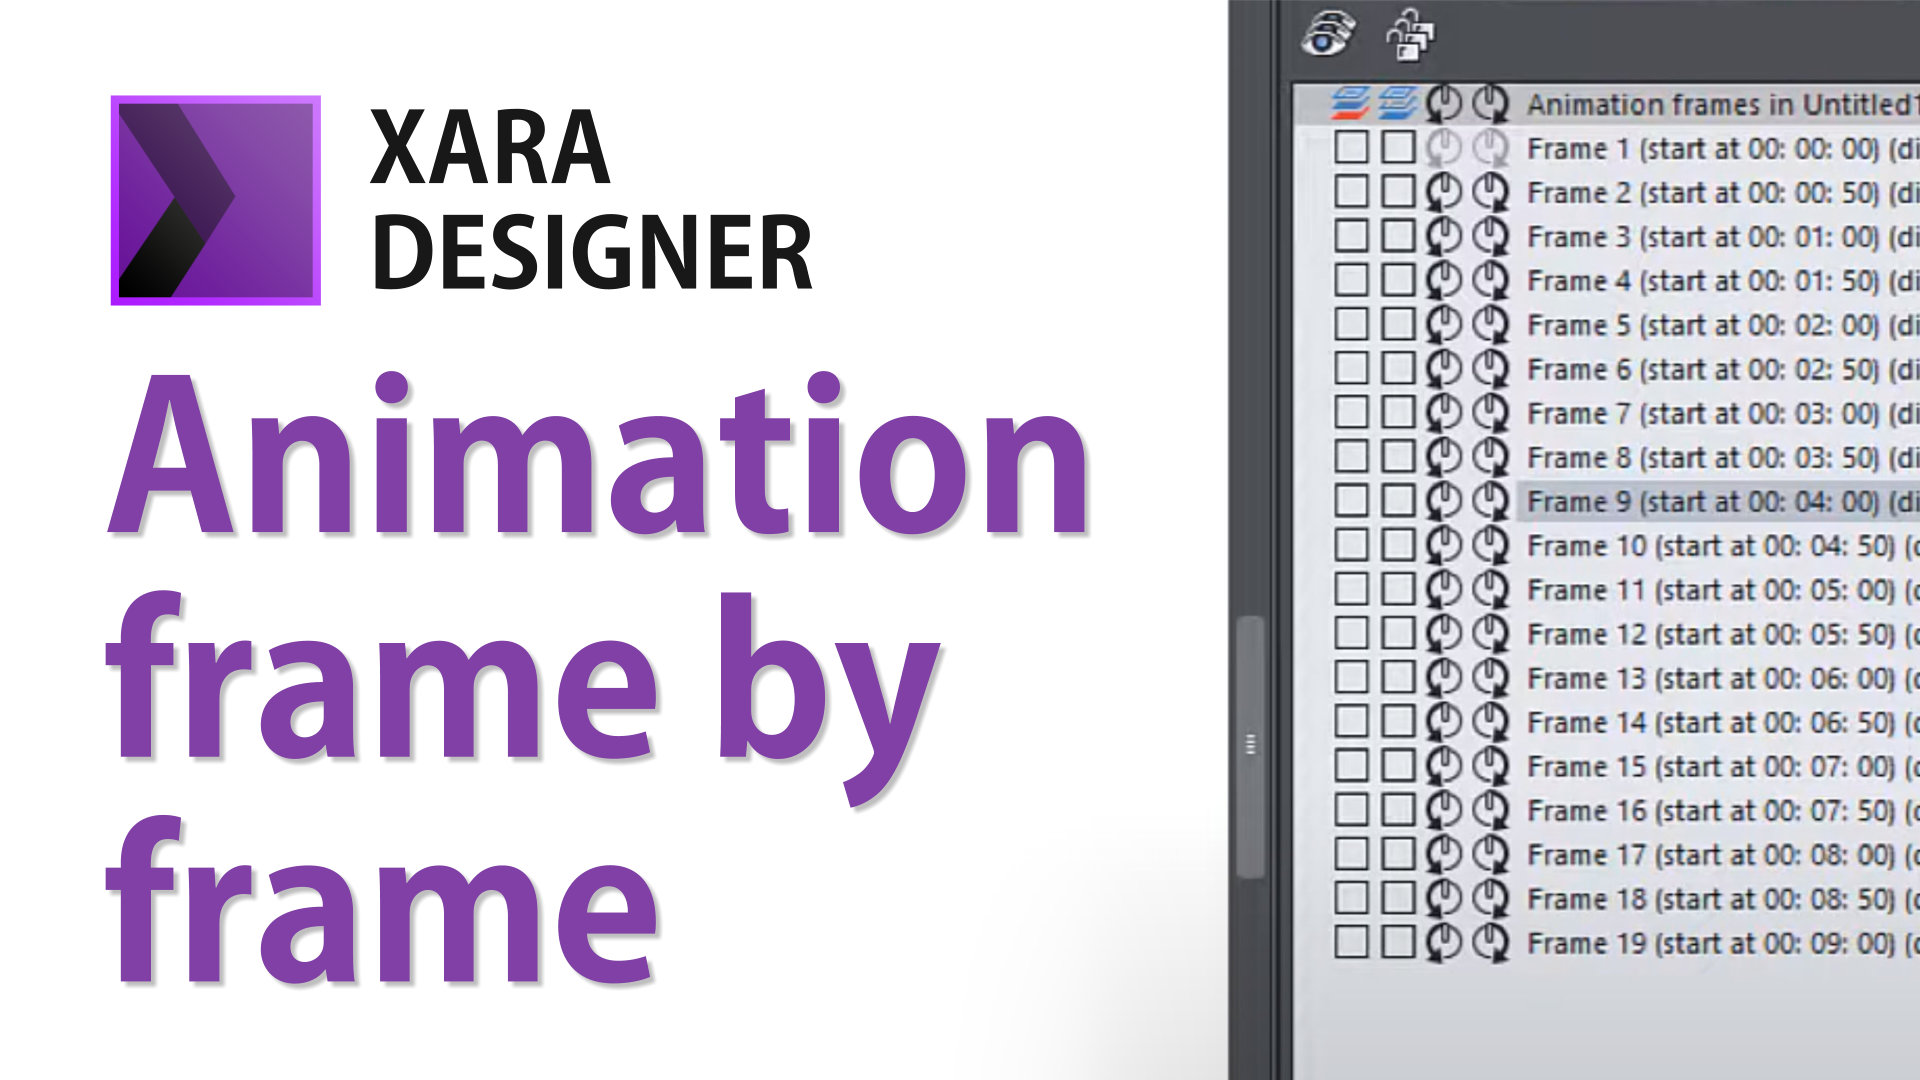 Creating frame by frame animations and animated GIFs in Xara Designer Pro